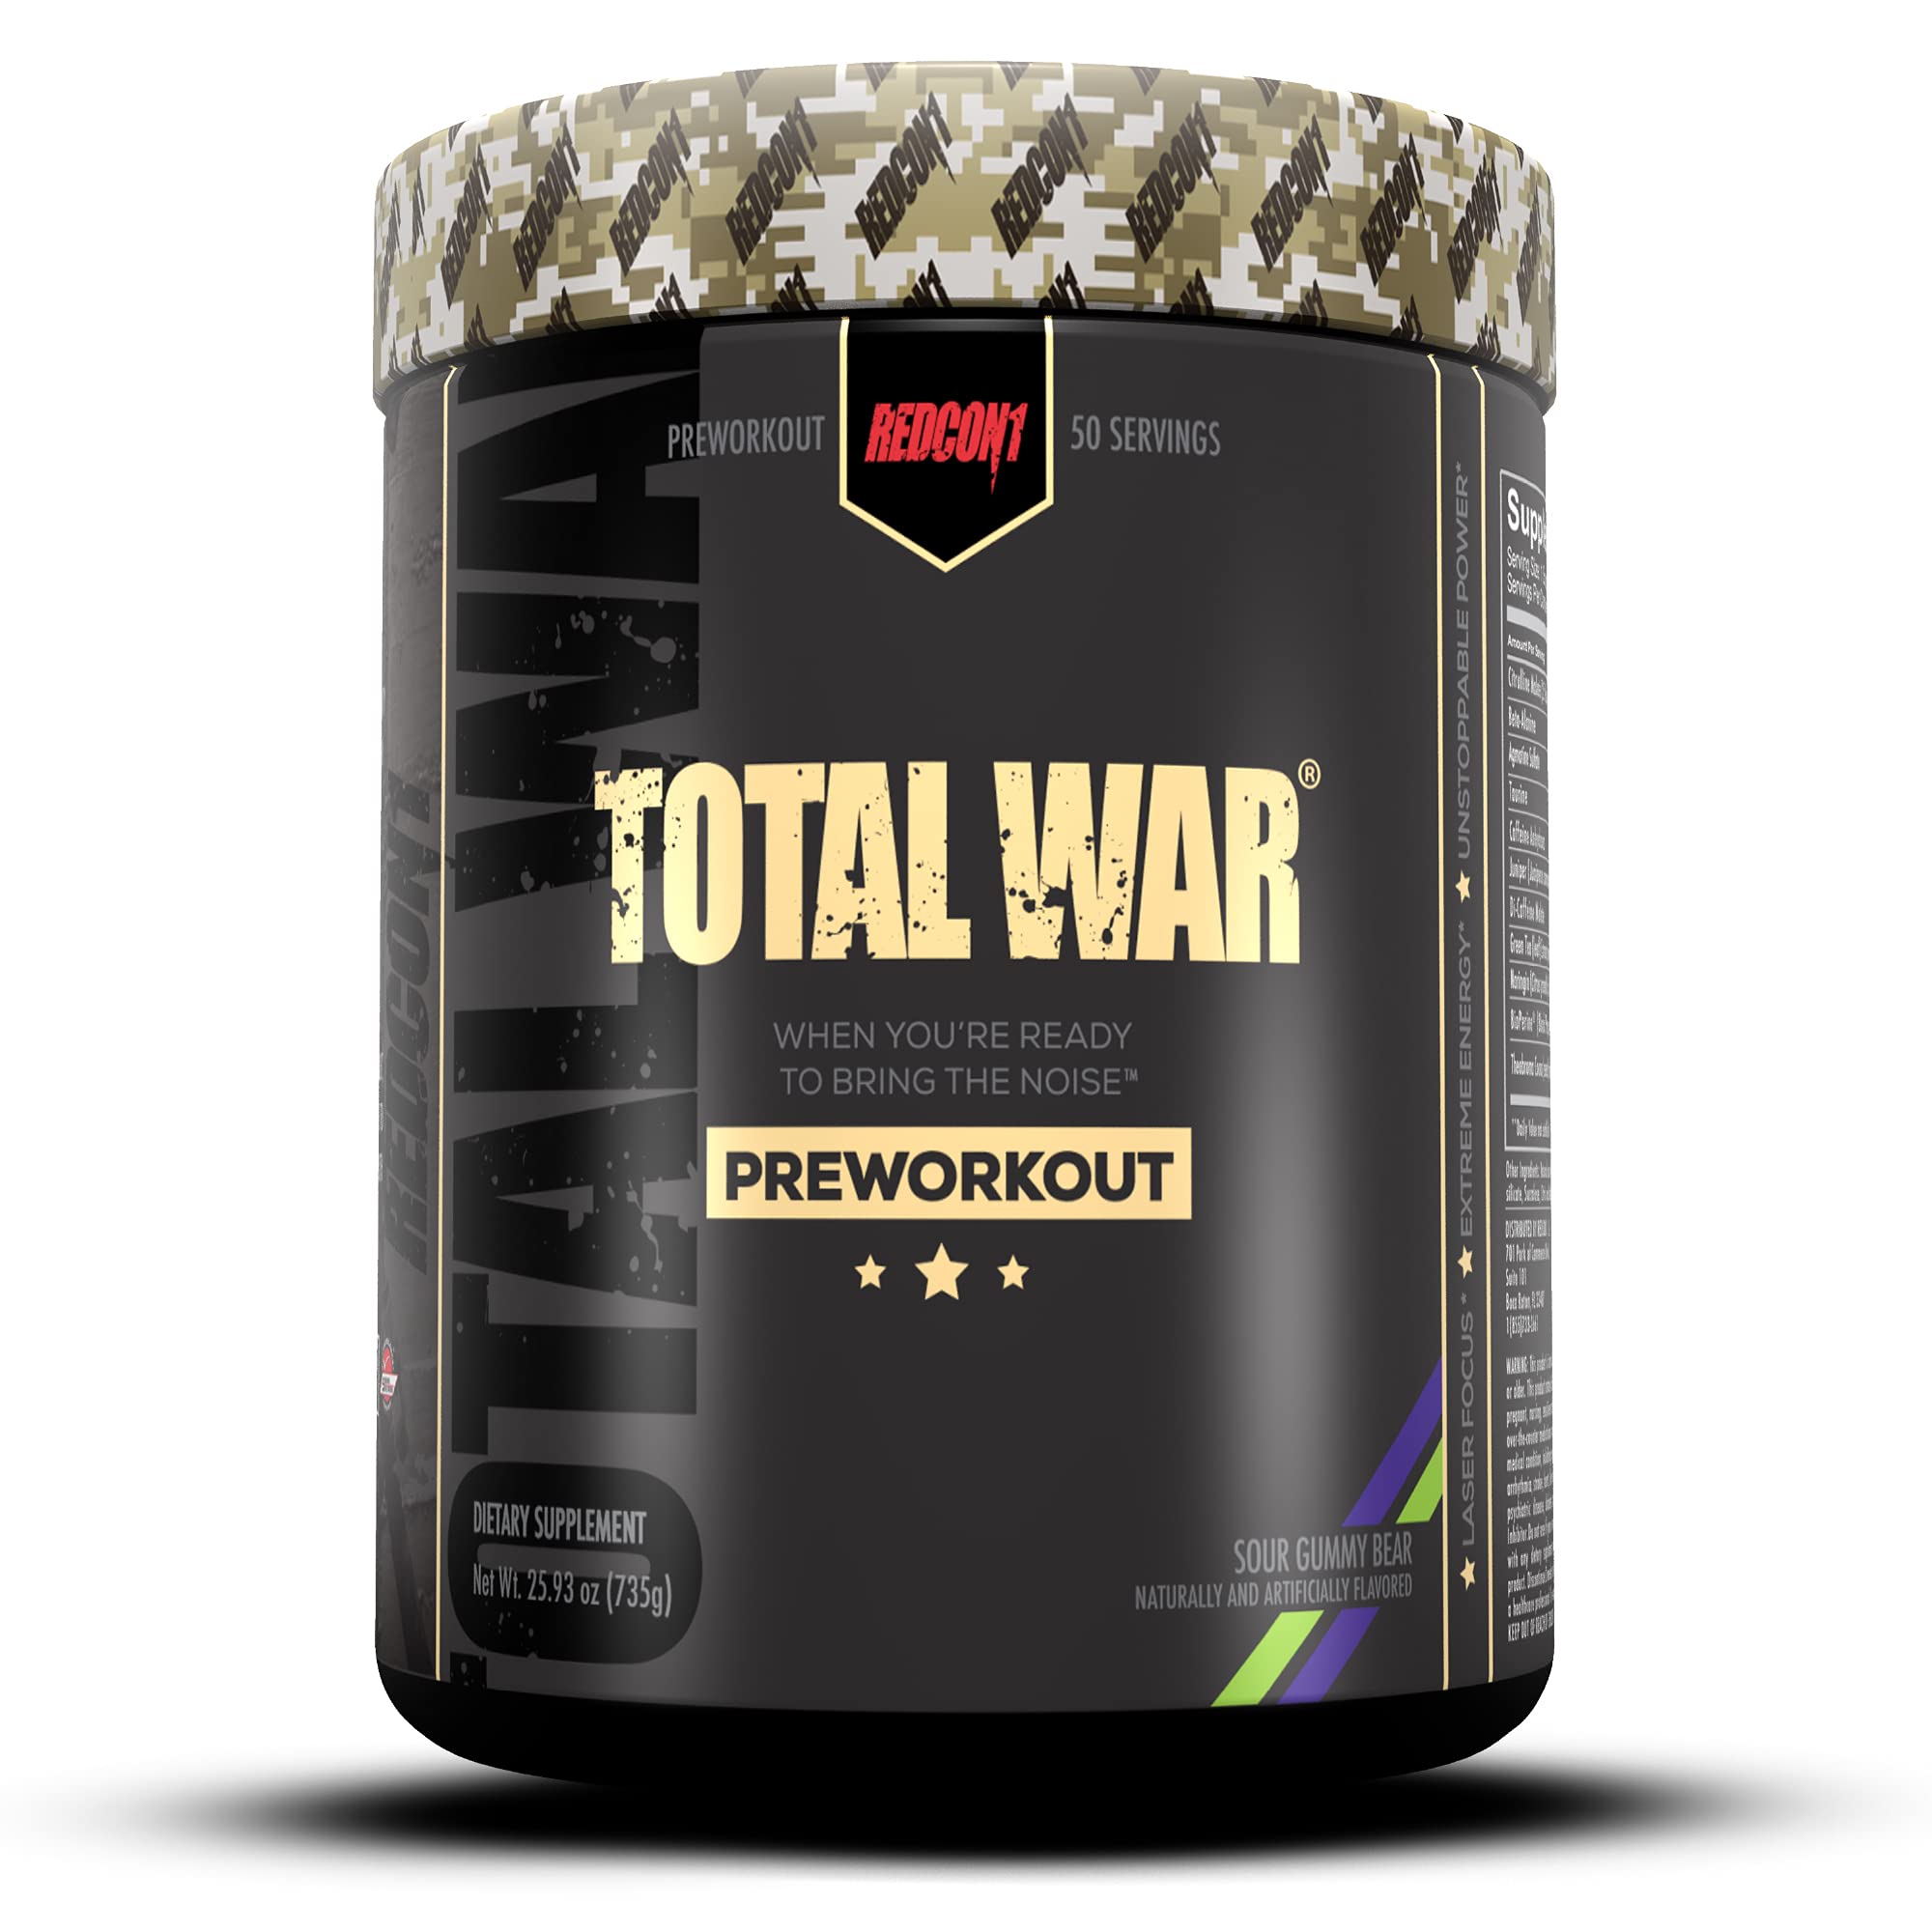 Redcon1 Total War - Pre Workout Powder, 50 Servings, (Sour Gummy Bear) Boost Energy, Increase Endurance and Focus, Beta-Alanine, 350mg Caffeine, Ci...